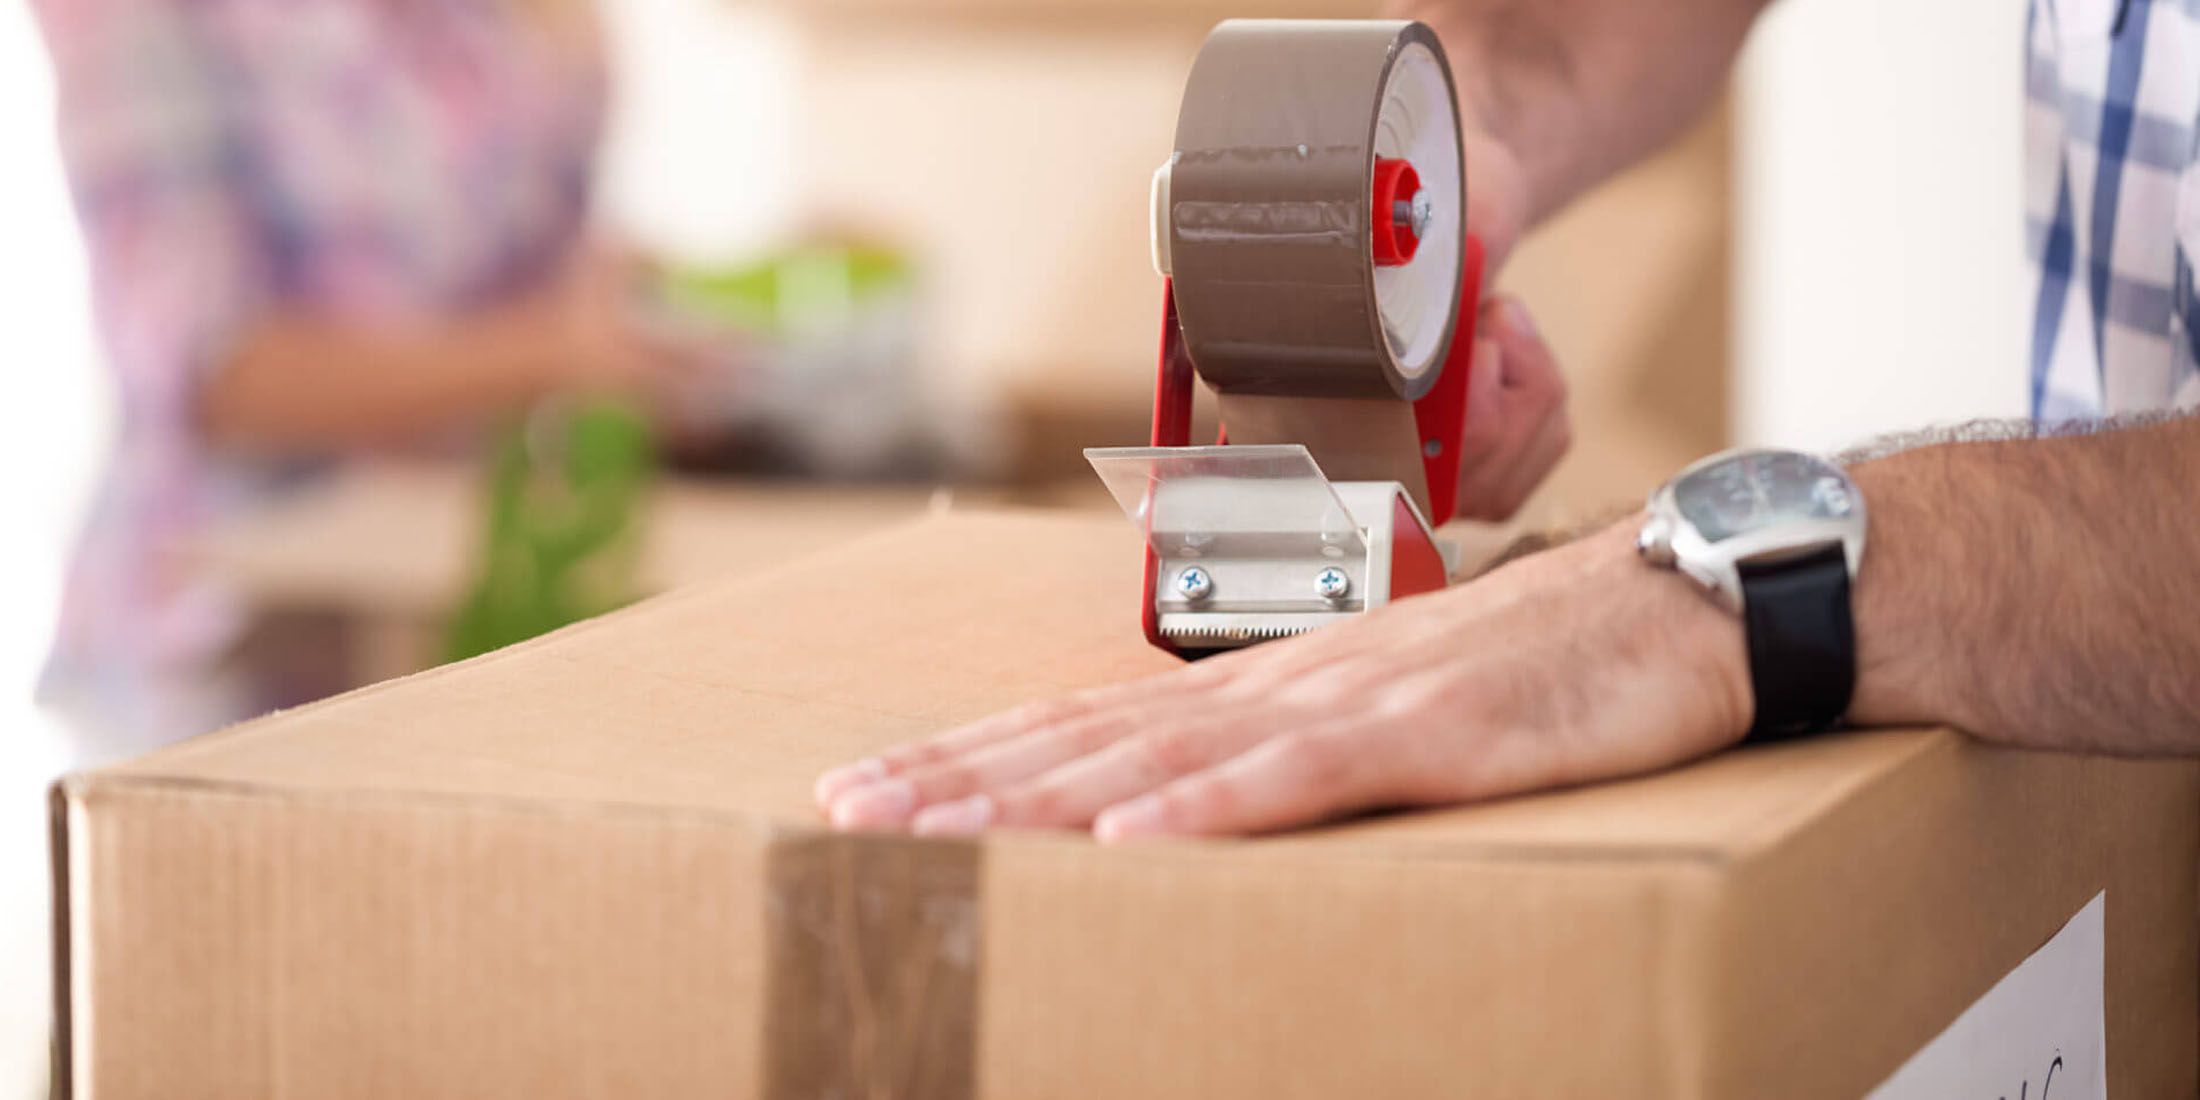 A stock image of someone taping a cardboard box closed while wearing a blue and white flannel shirt.